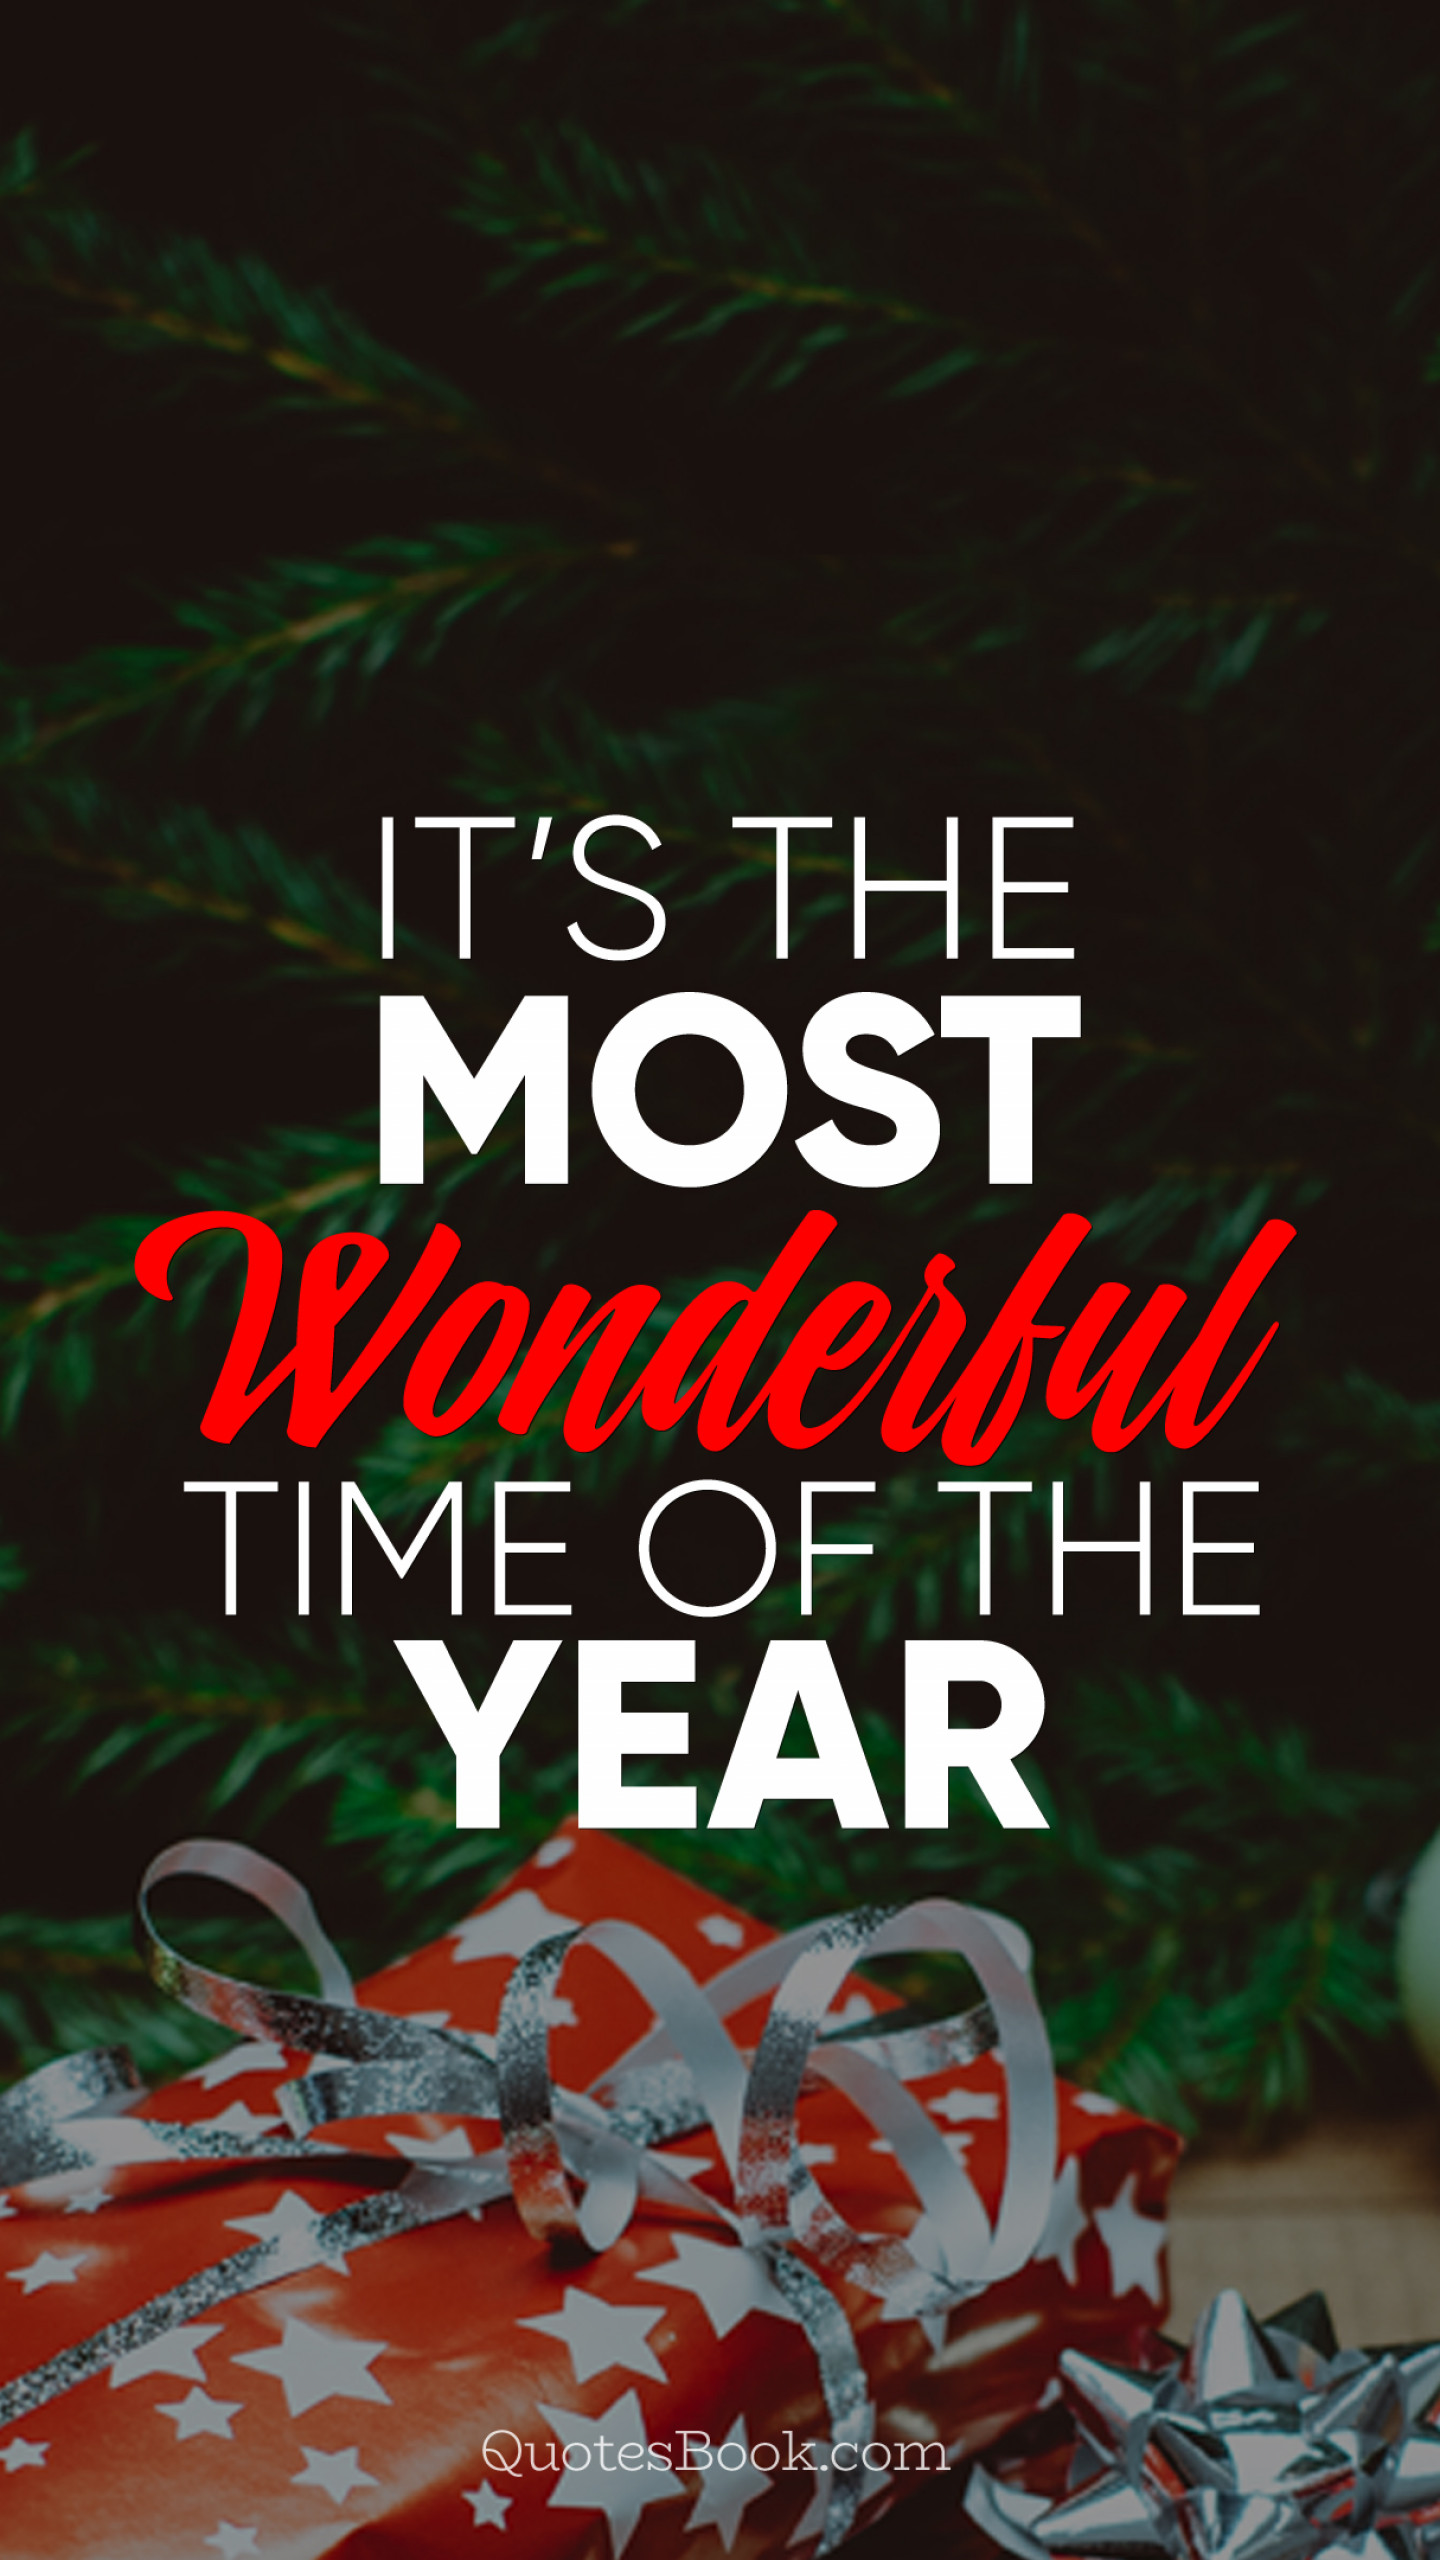 It’s the most wonderful time of the year - QuotesBook